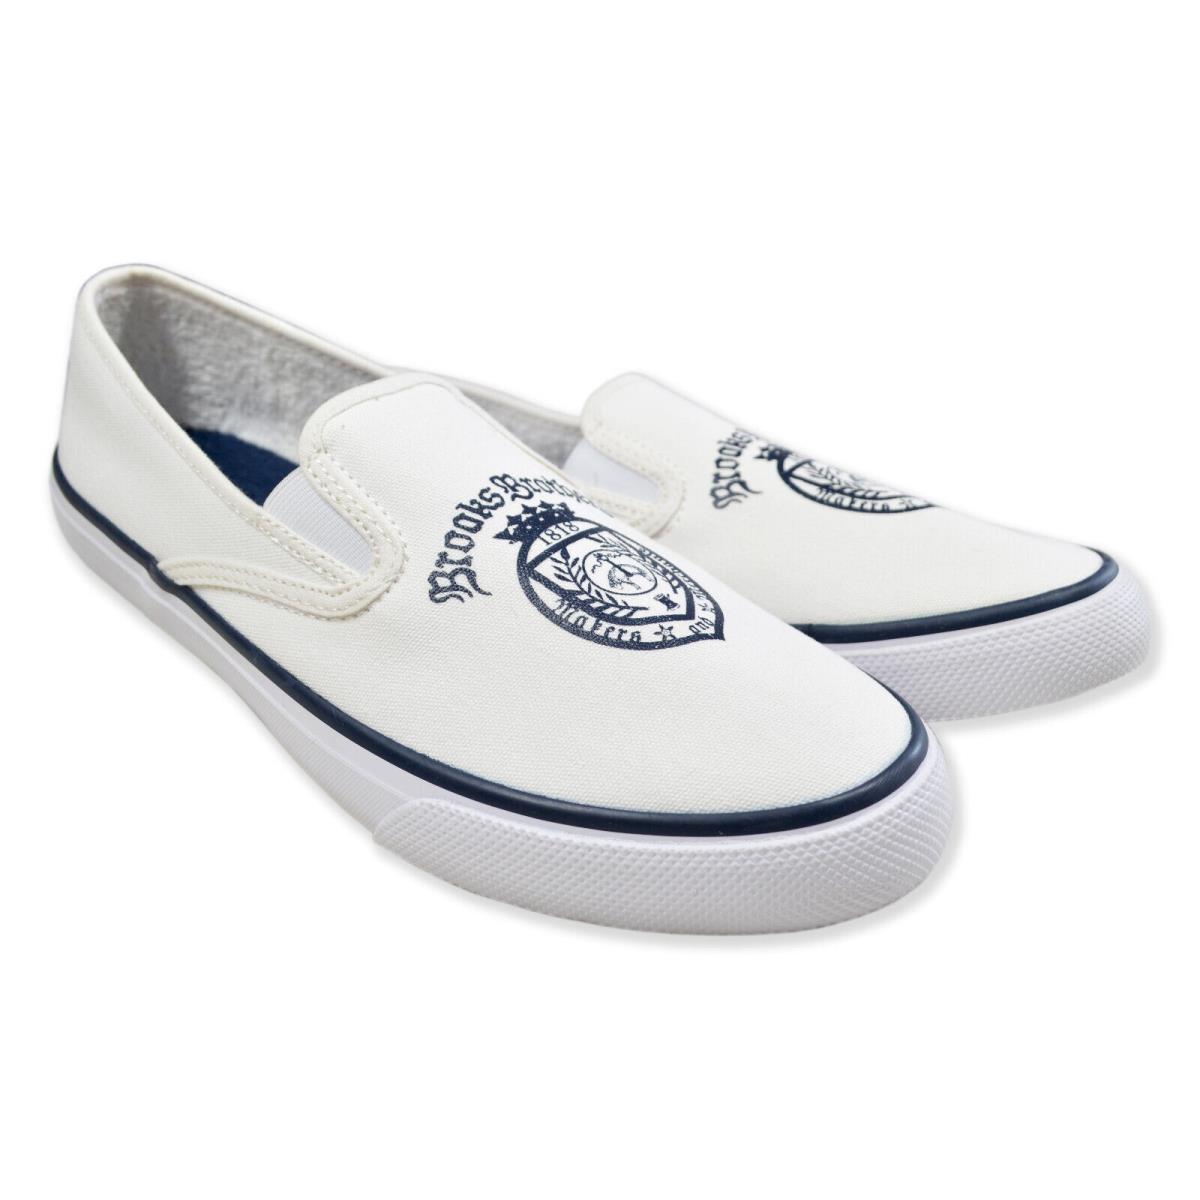 Brooks Brothers Sperry White Navy Crest Canvas Slip On Sneakers 9 M 8412-9